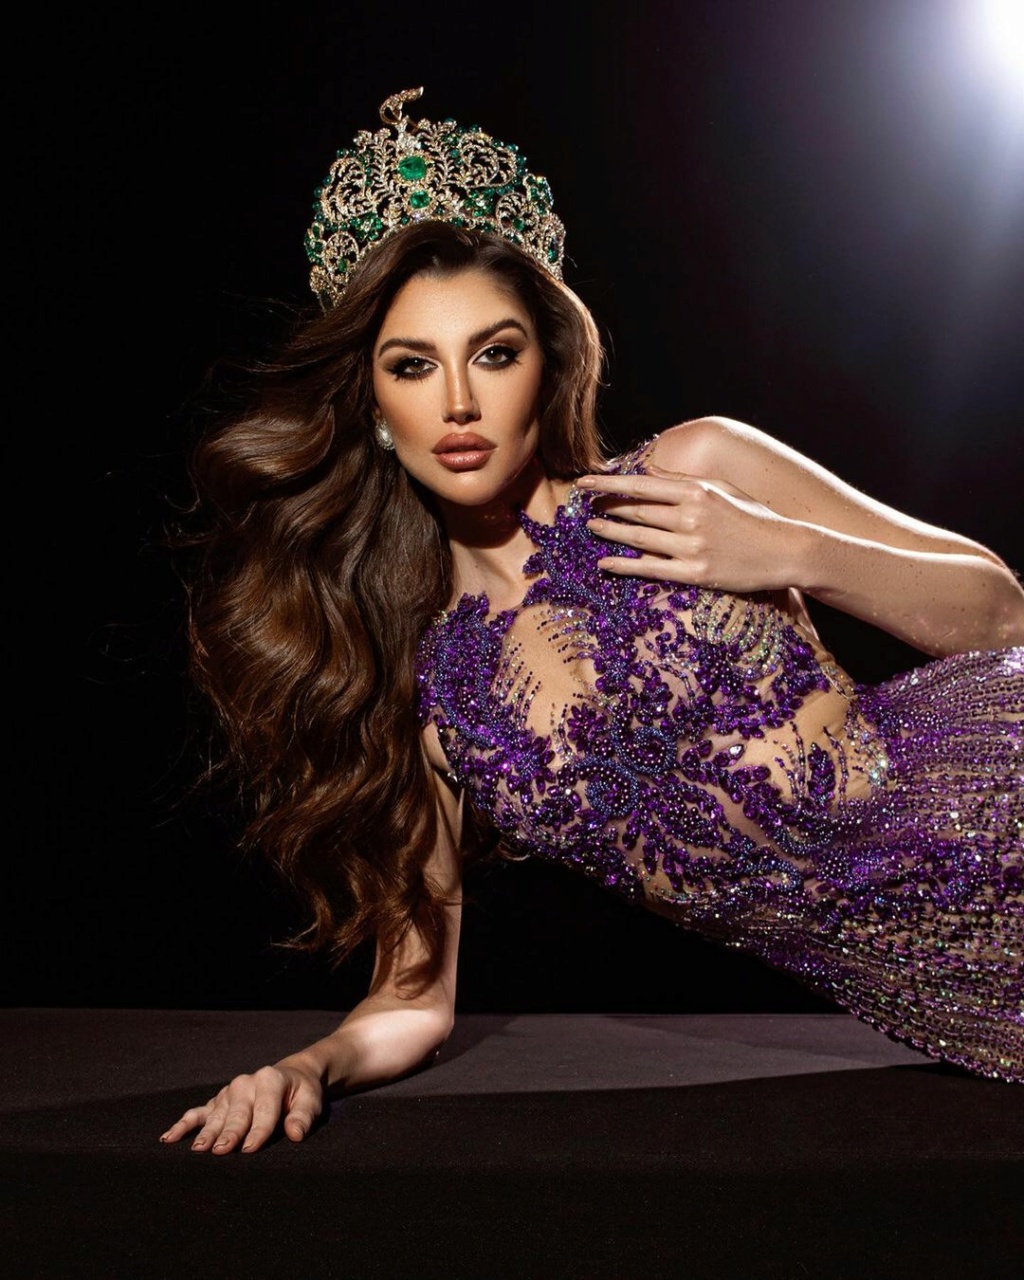 The Official Thread Of MISS GRAND INTERNATIONAL 2022 : ISABELLA MENIN from BRAZIL. - Page 2 35585810